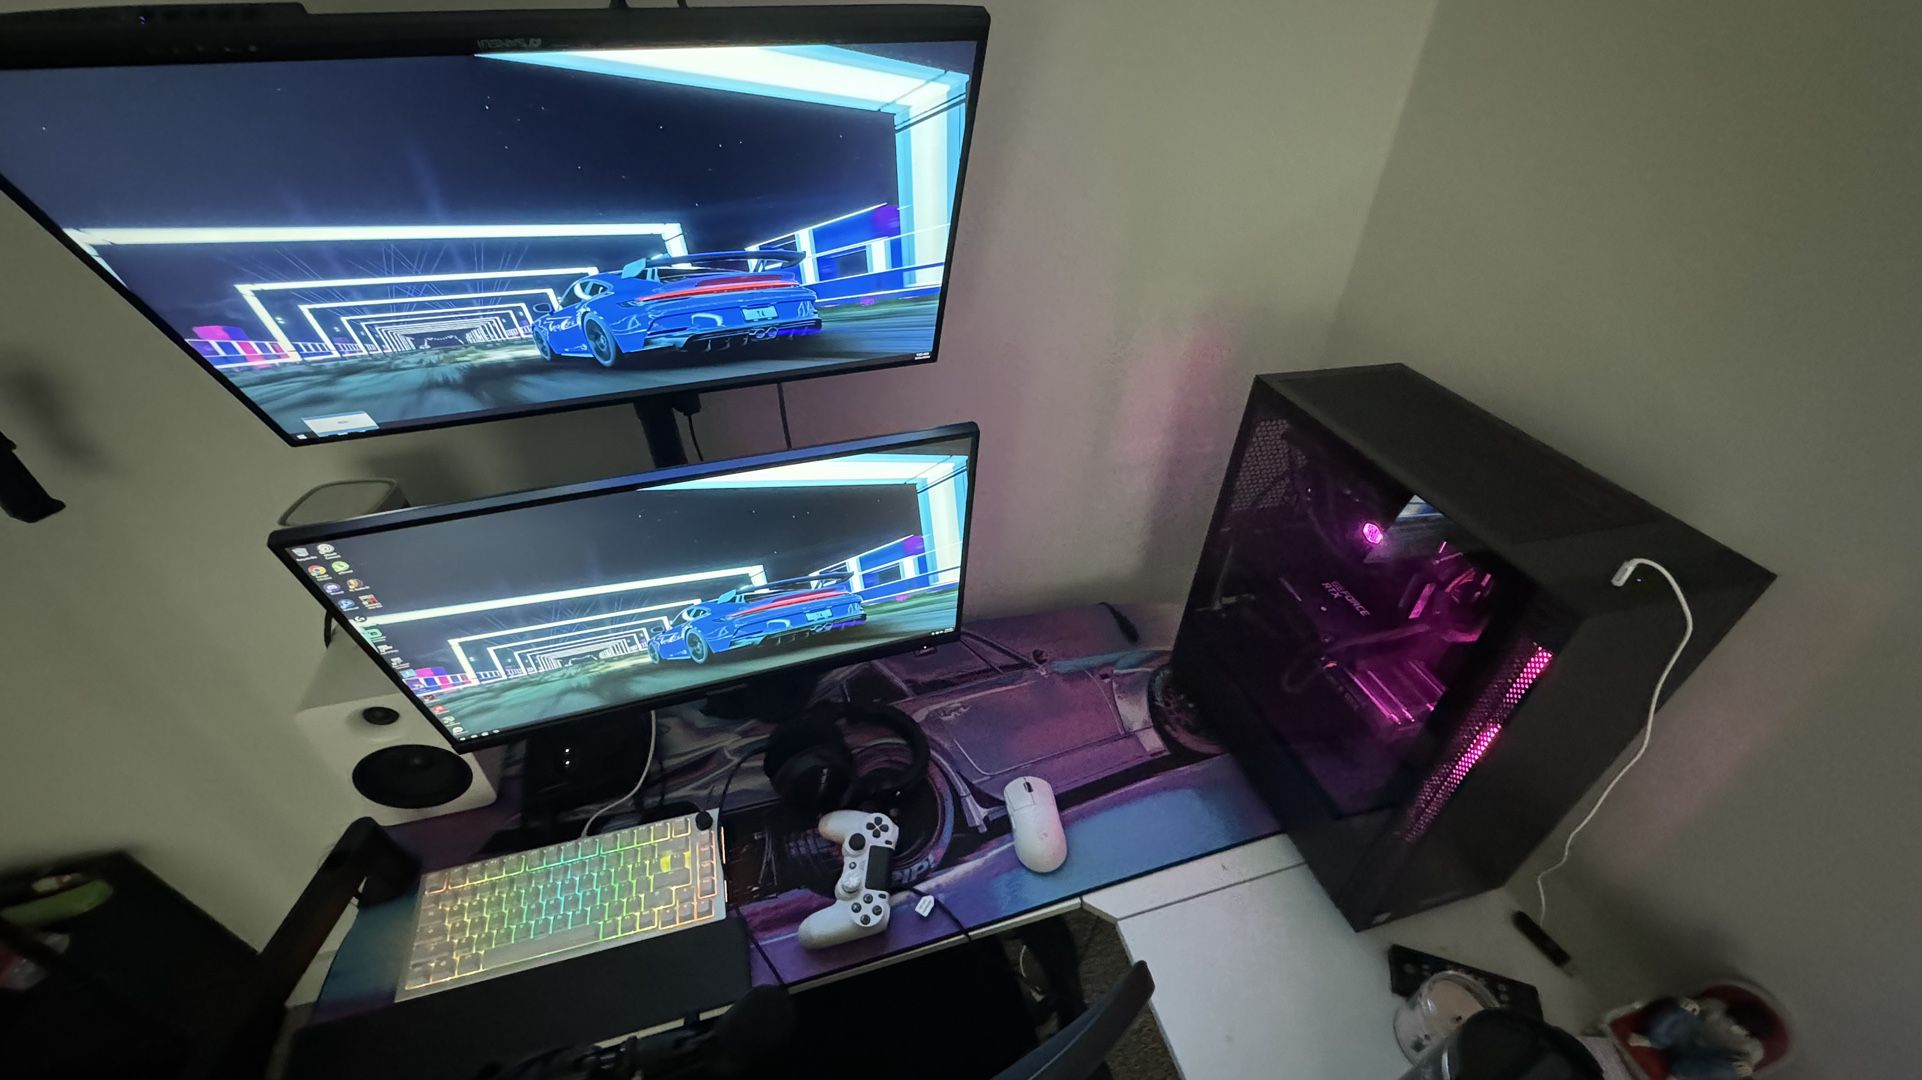 Entire Gaming / Streaming PC Setup